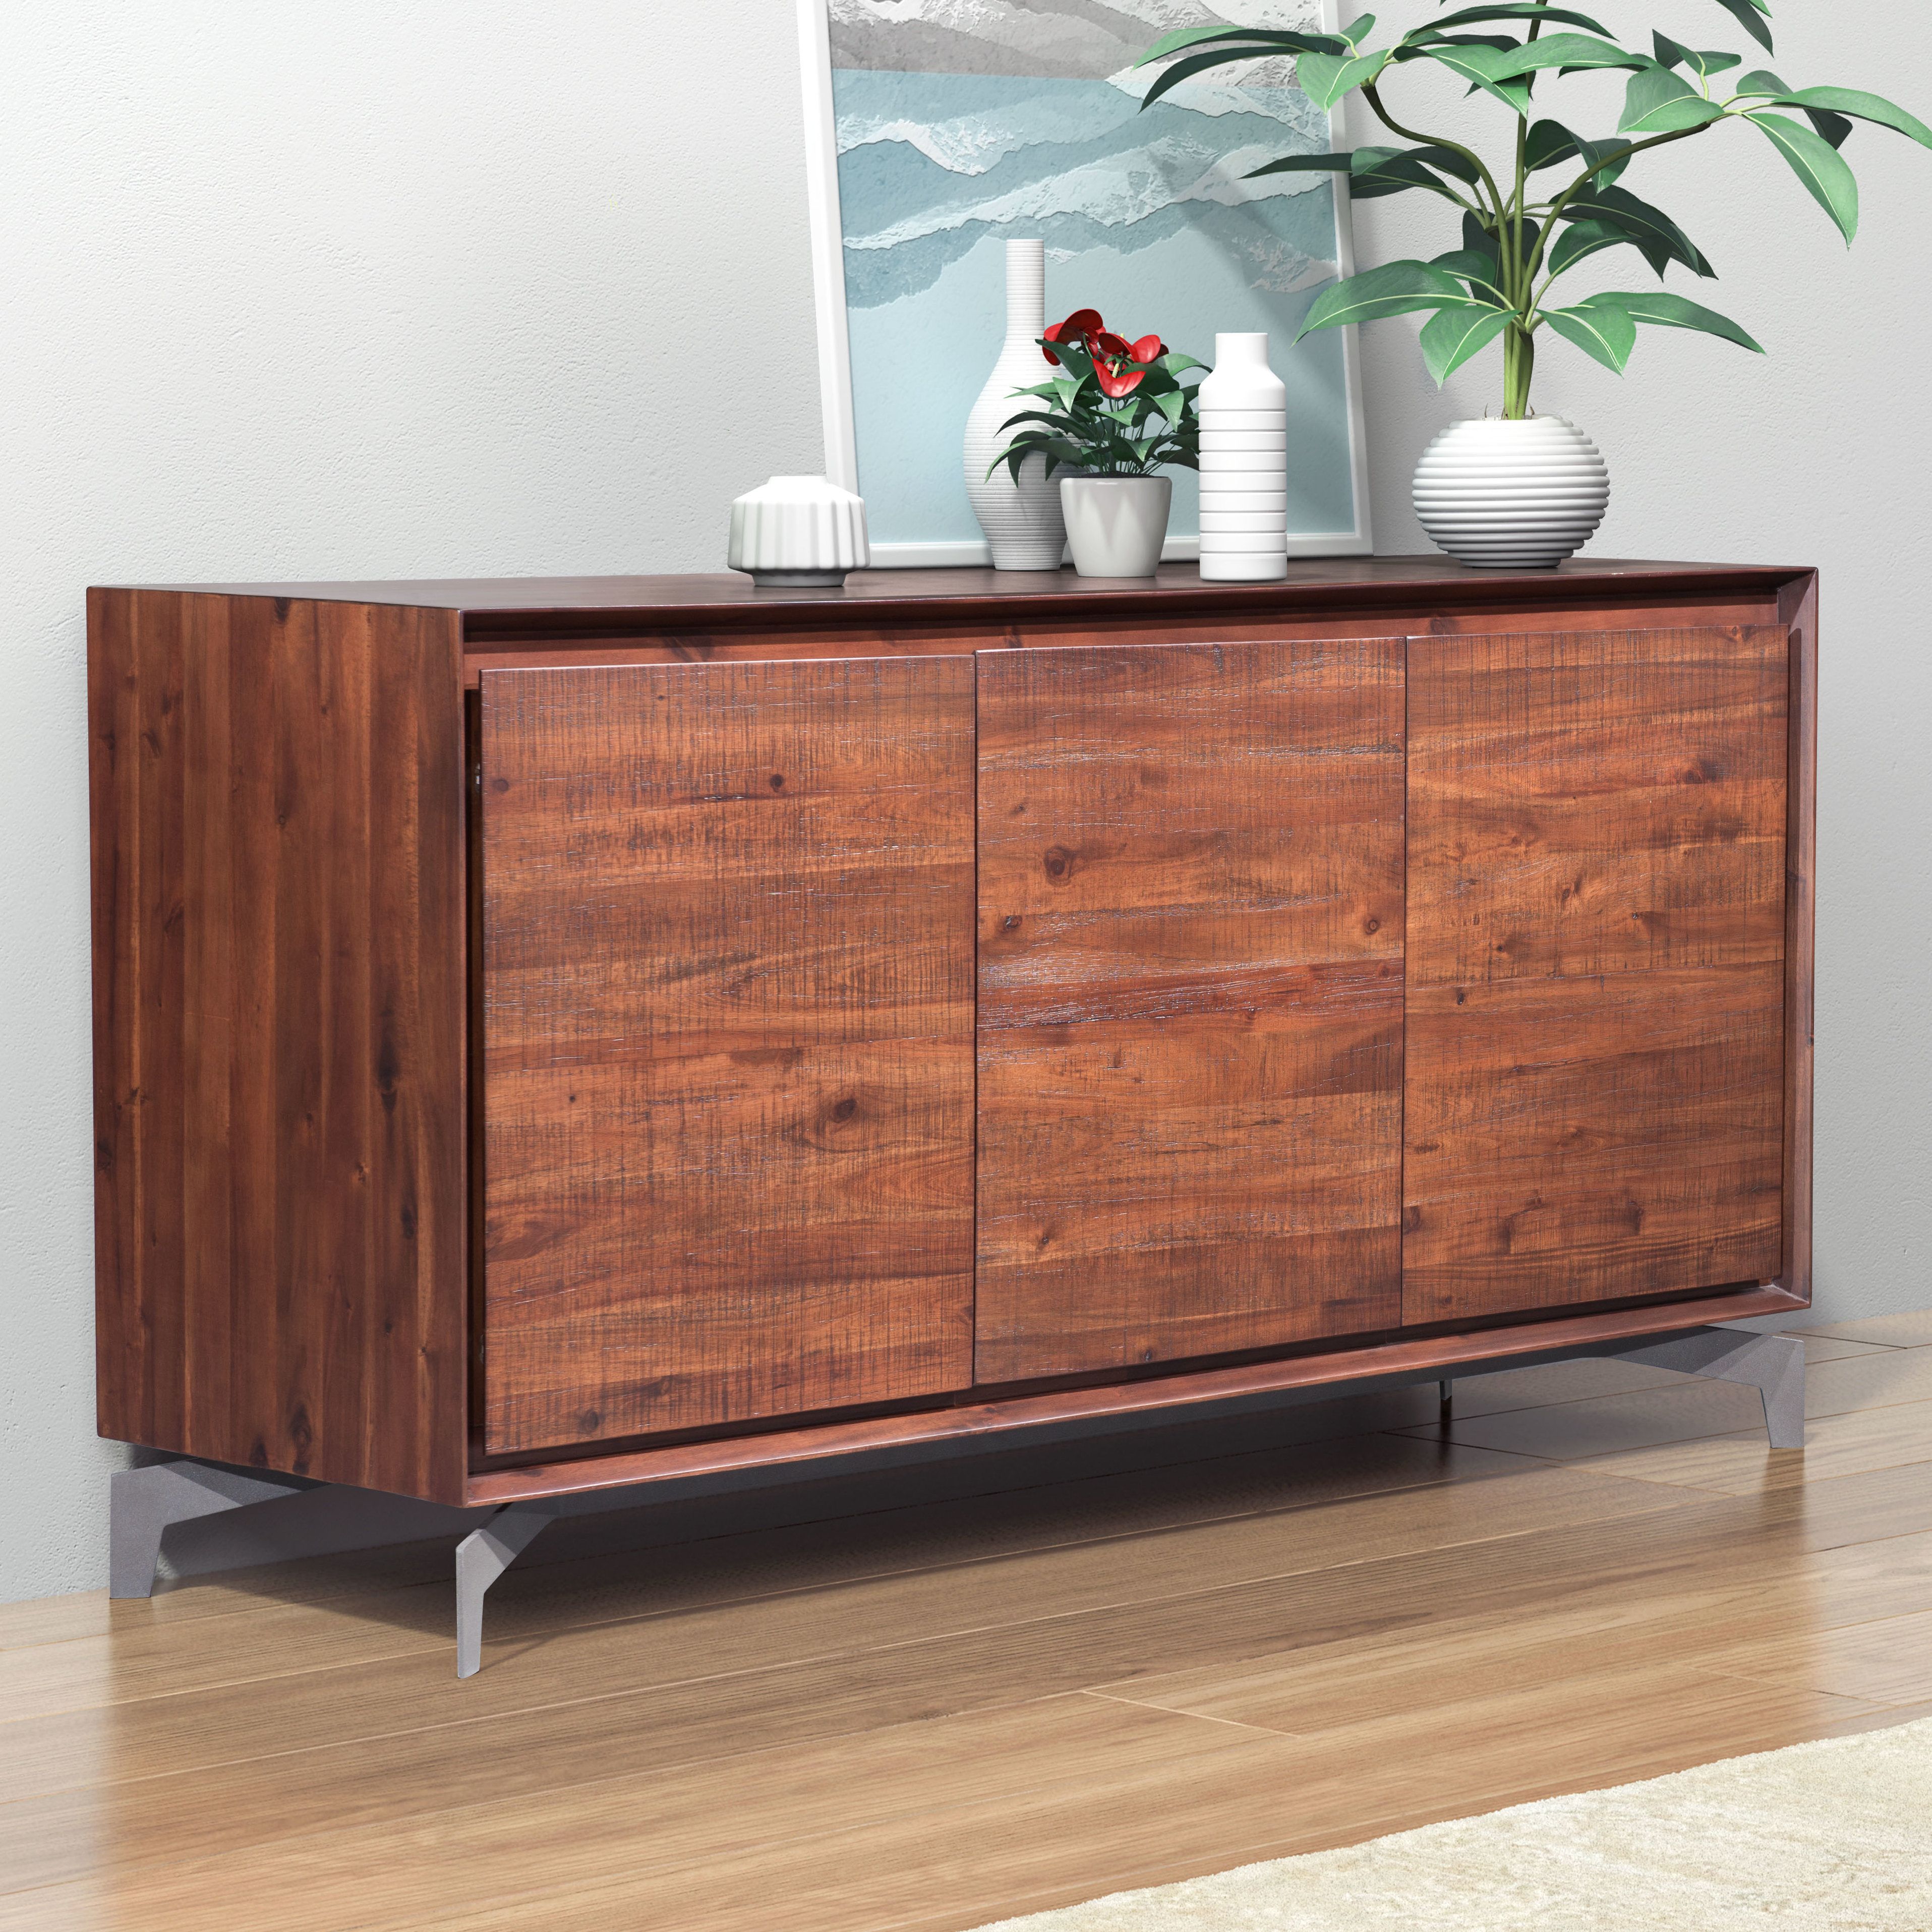 Riggleman Sideboard | Joss & Main For 2018 Armelle Sideboards (View 6 of 20)